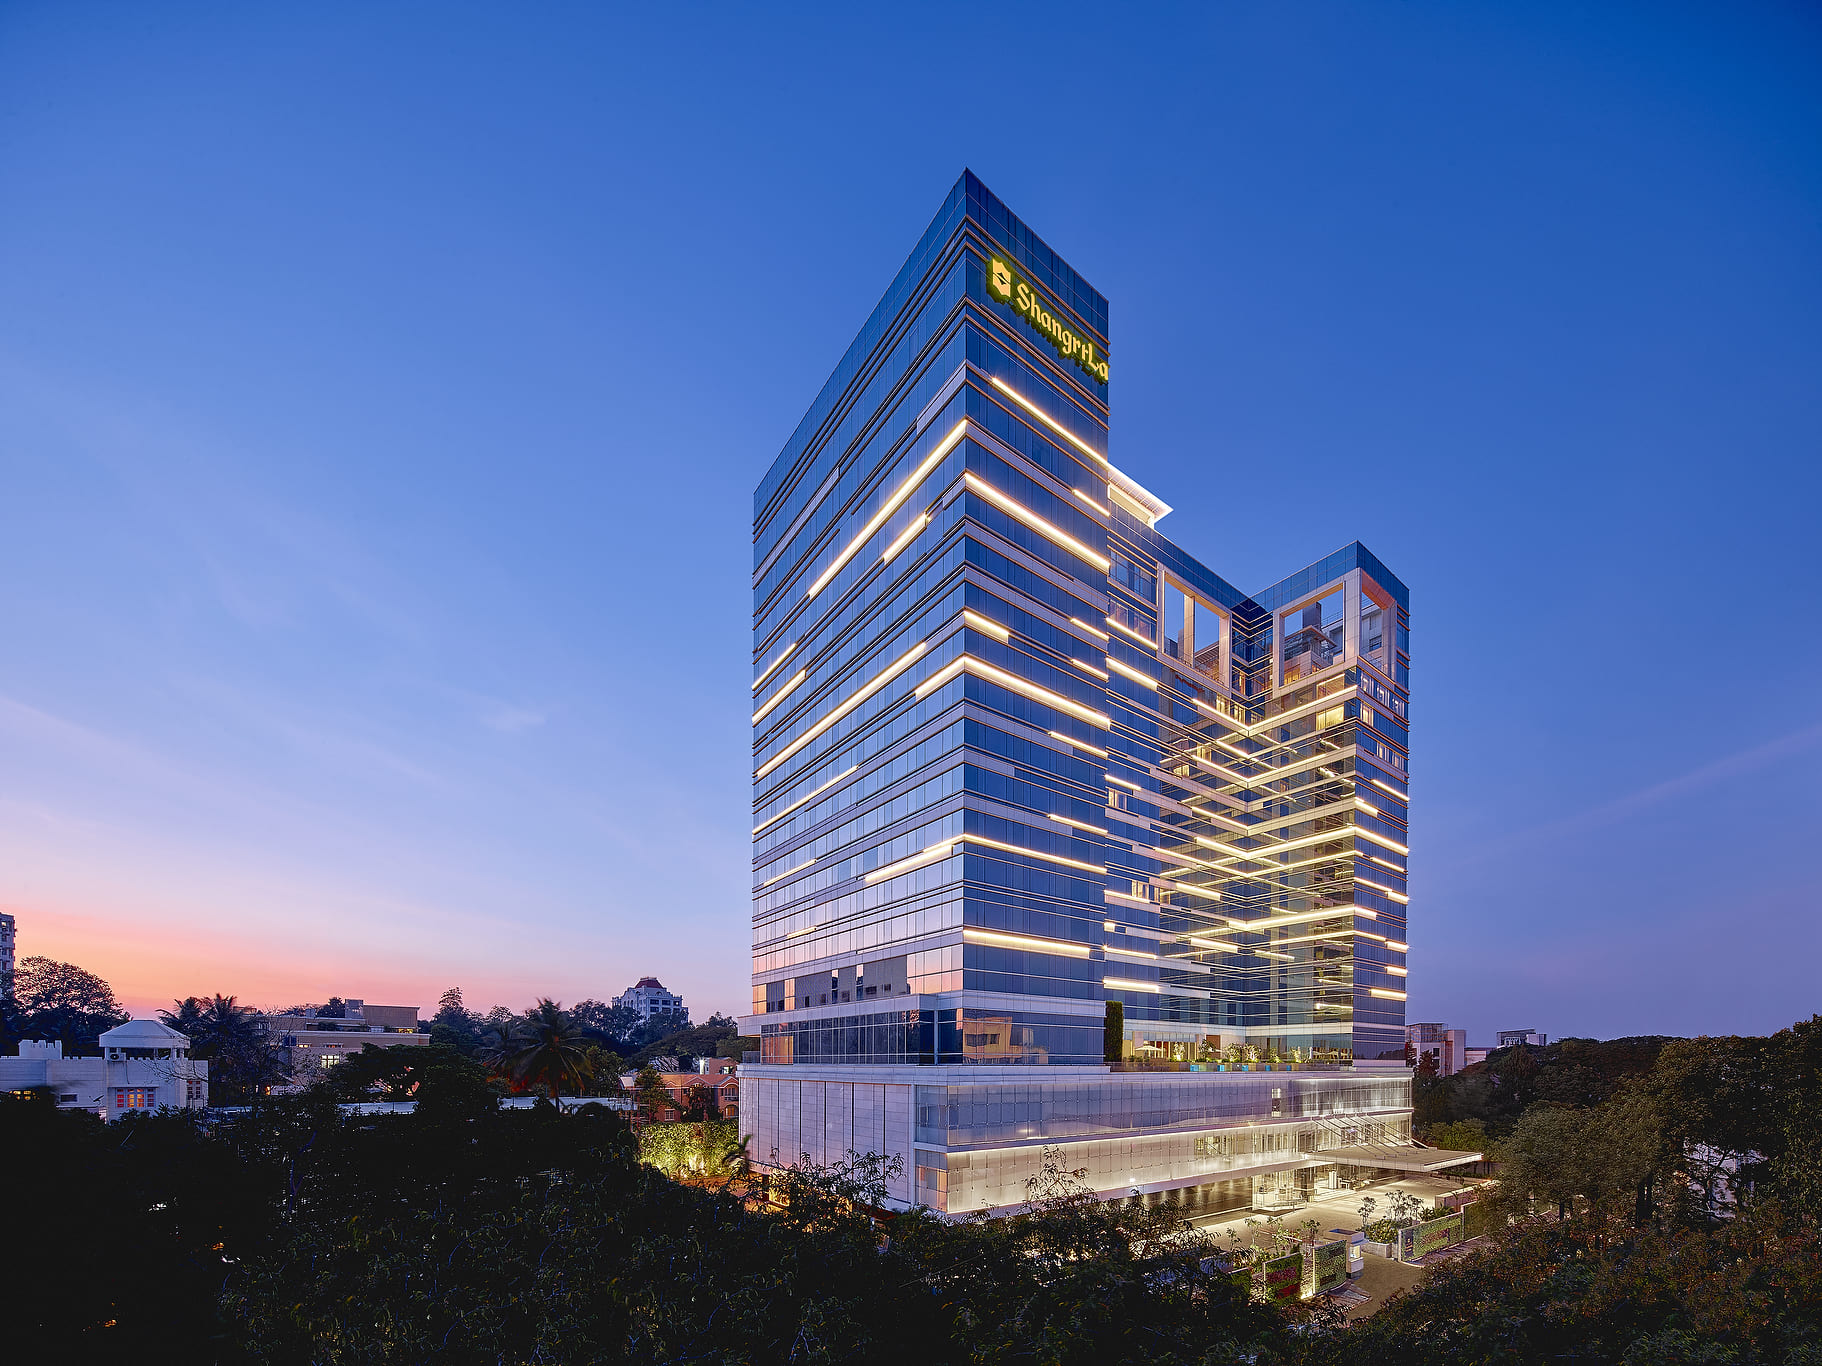 Shangri-La Bengaluru all set to celebrate eighth anniversary with special offers to guests